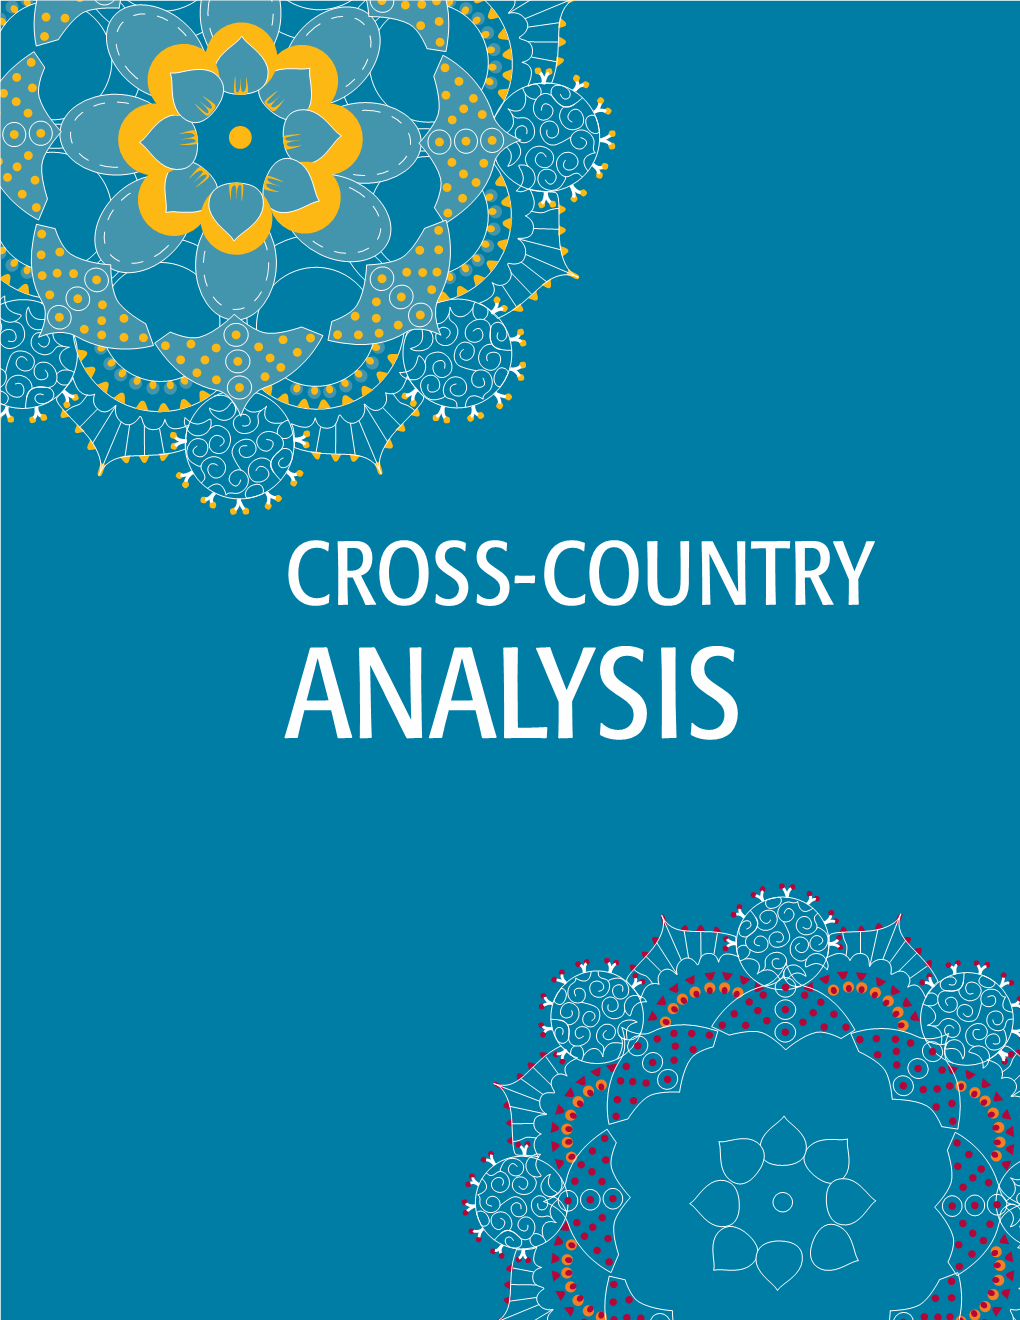 Cross-Country Analysis Violence Against Lesbians, Bisexual Women and Transgender People in Asia: a Five Country Study